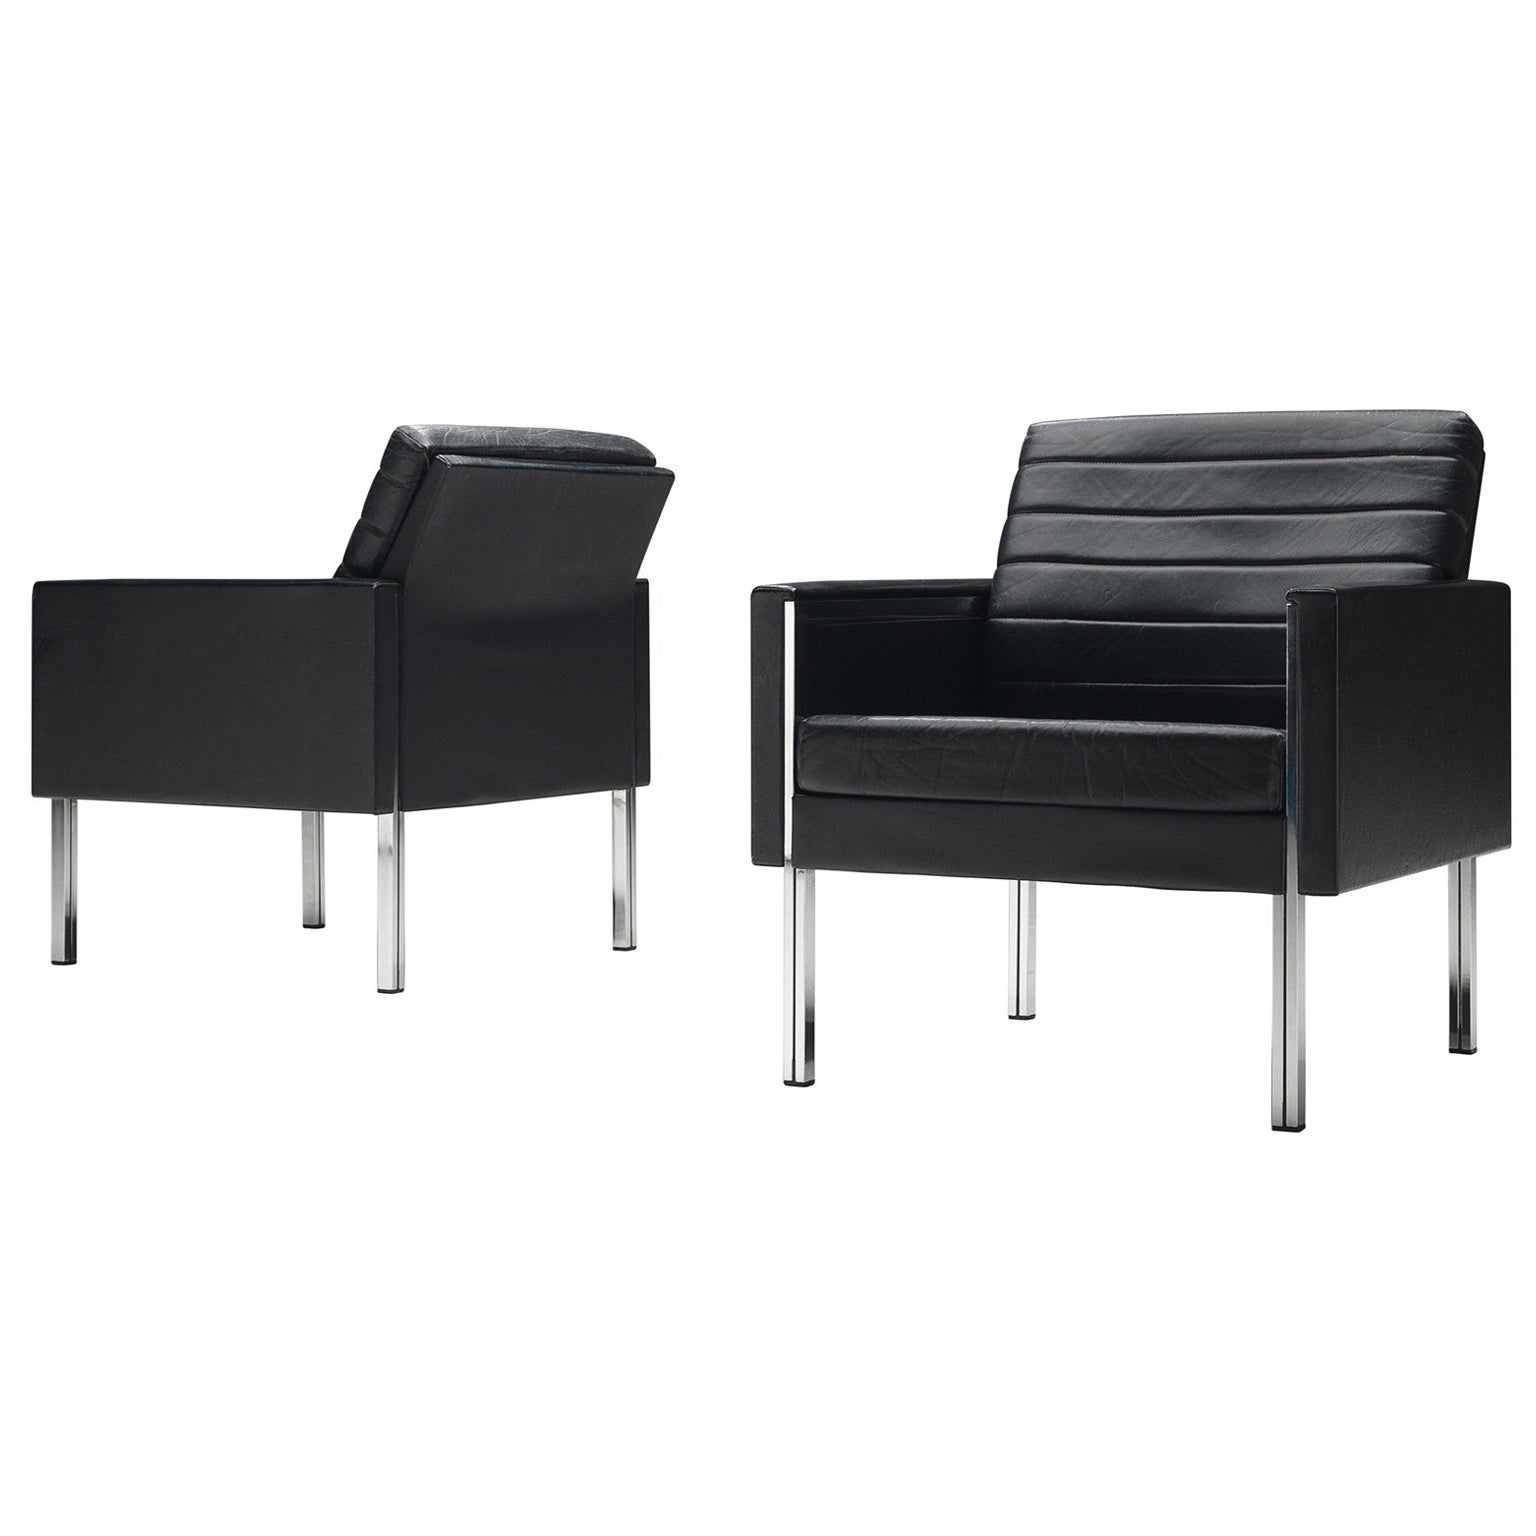 Pair of Armchairs in Black Leather and Steel